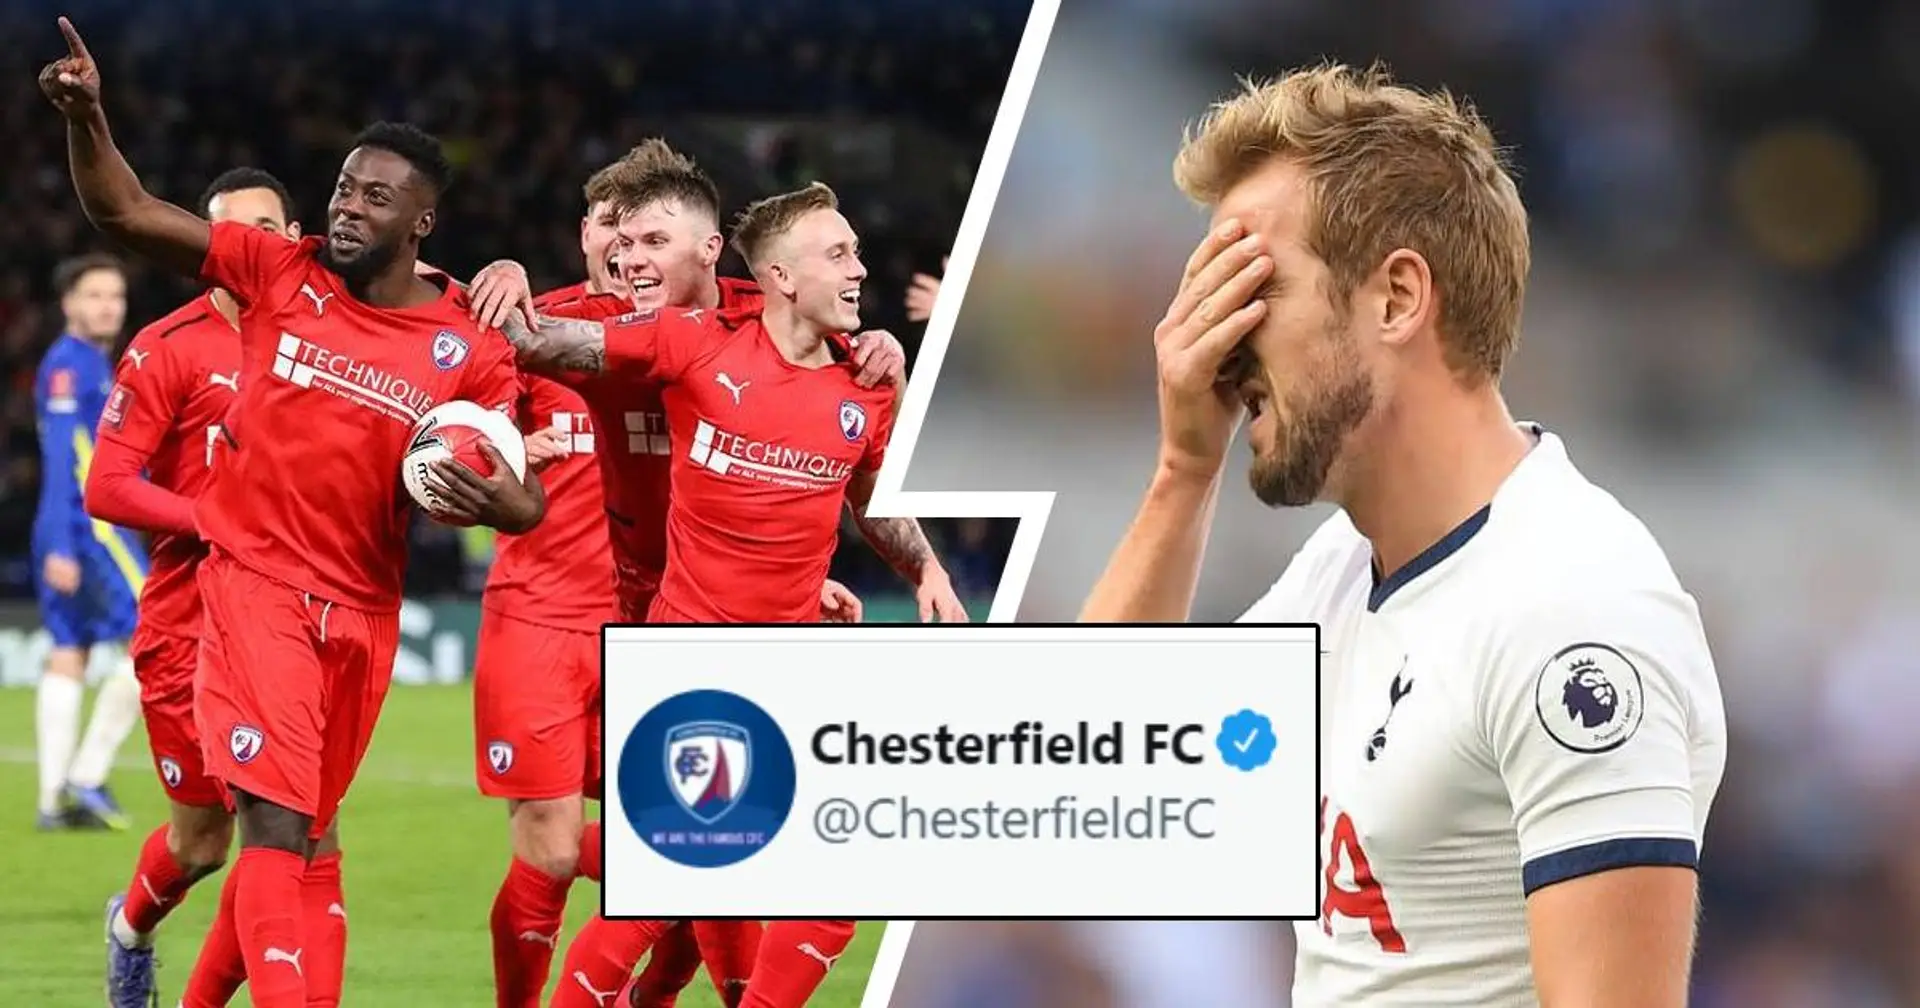 Chesterfield brutally mock Spurs on Twitter after goalless defeat against Chelsea